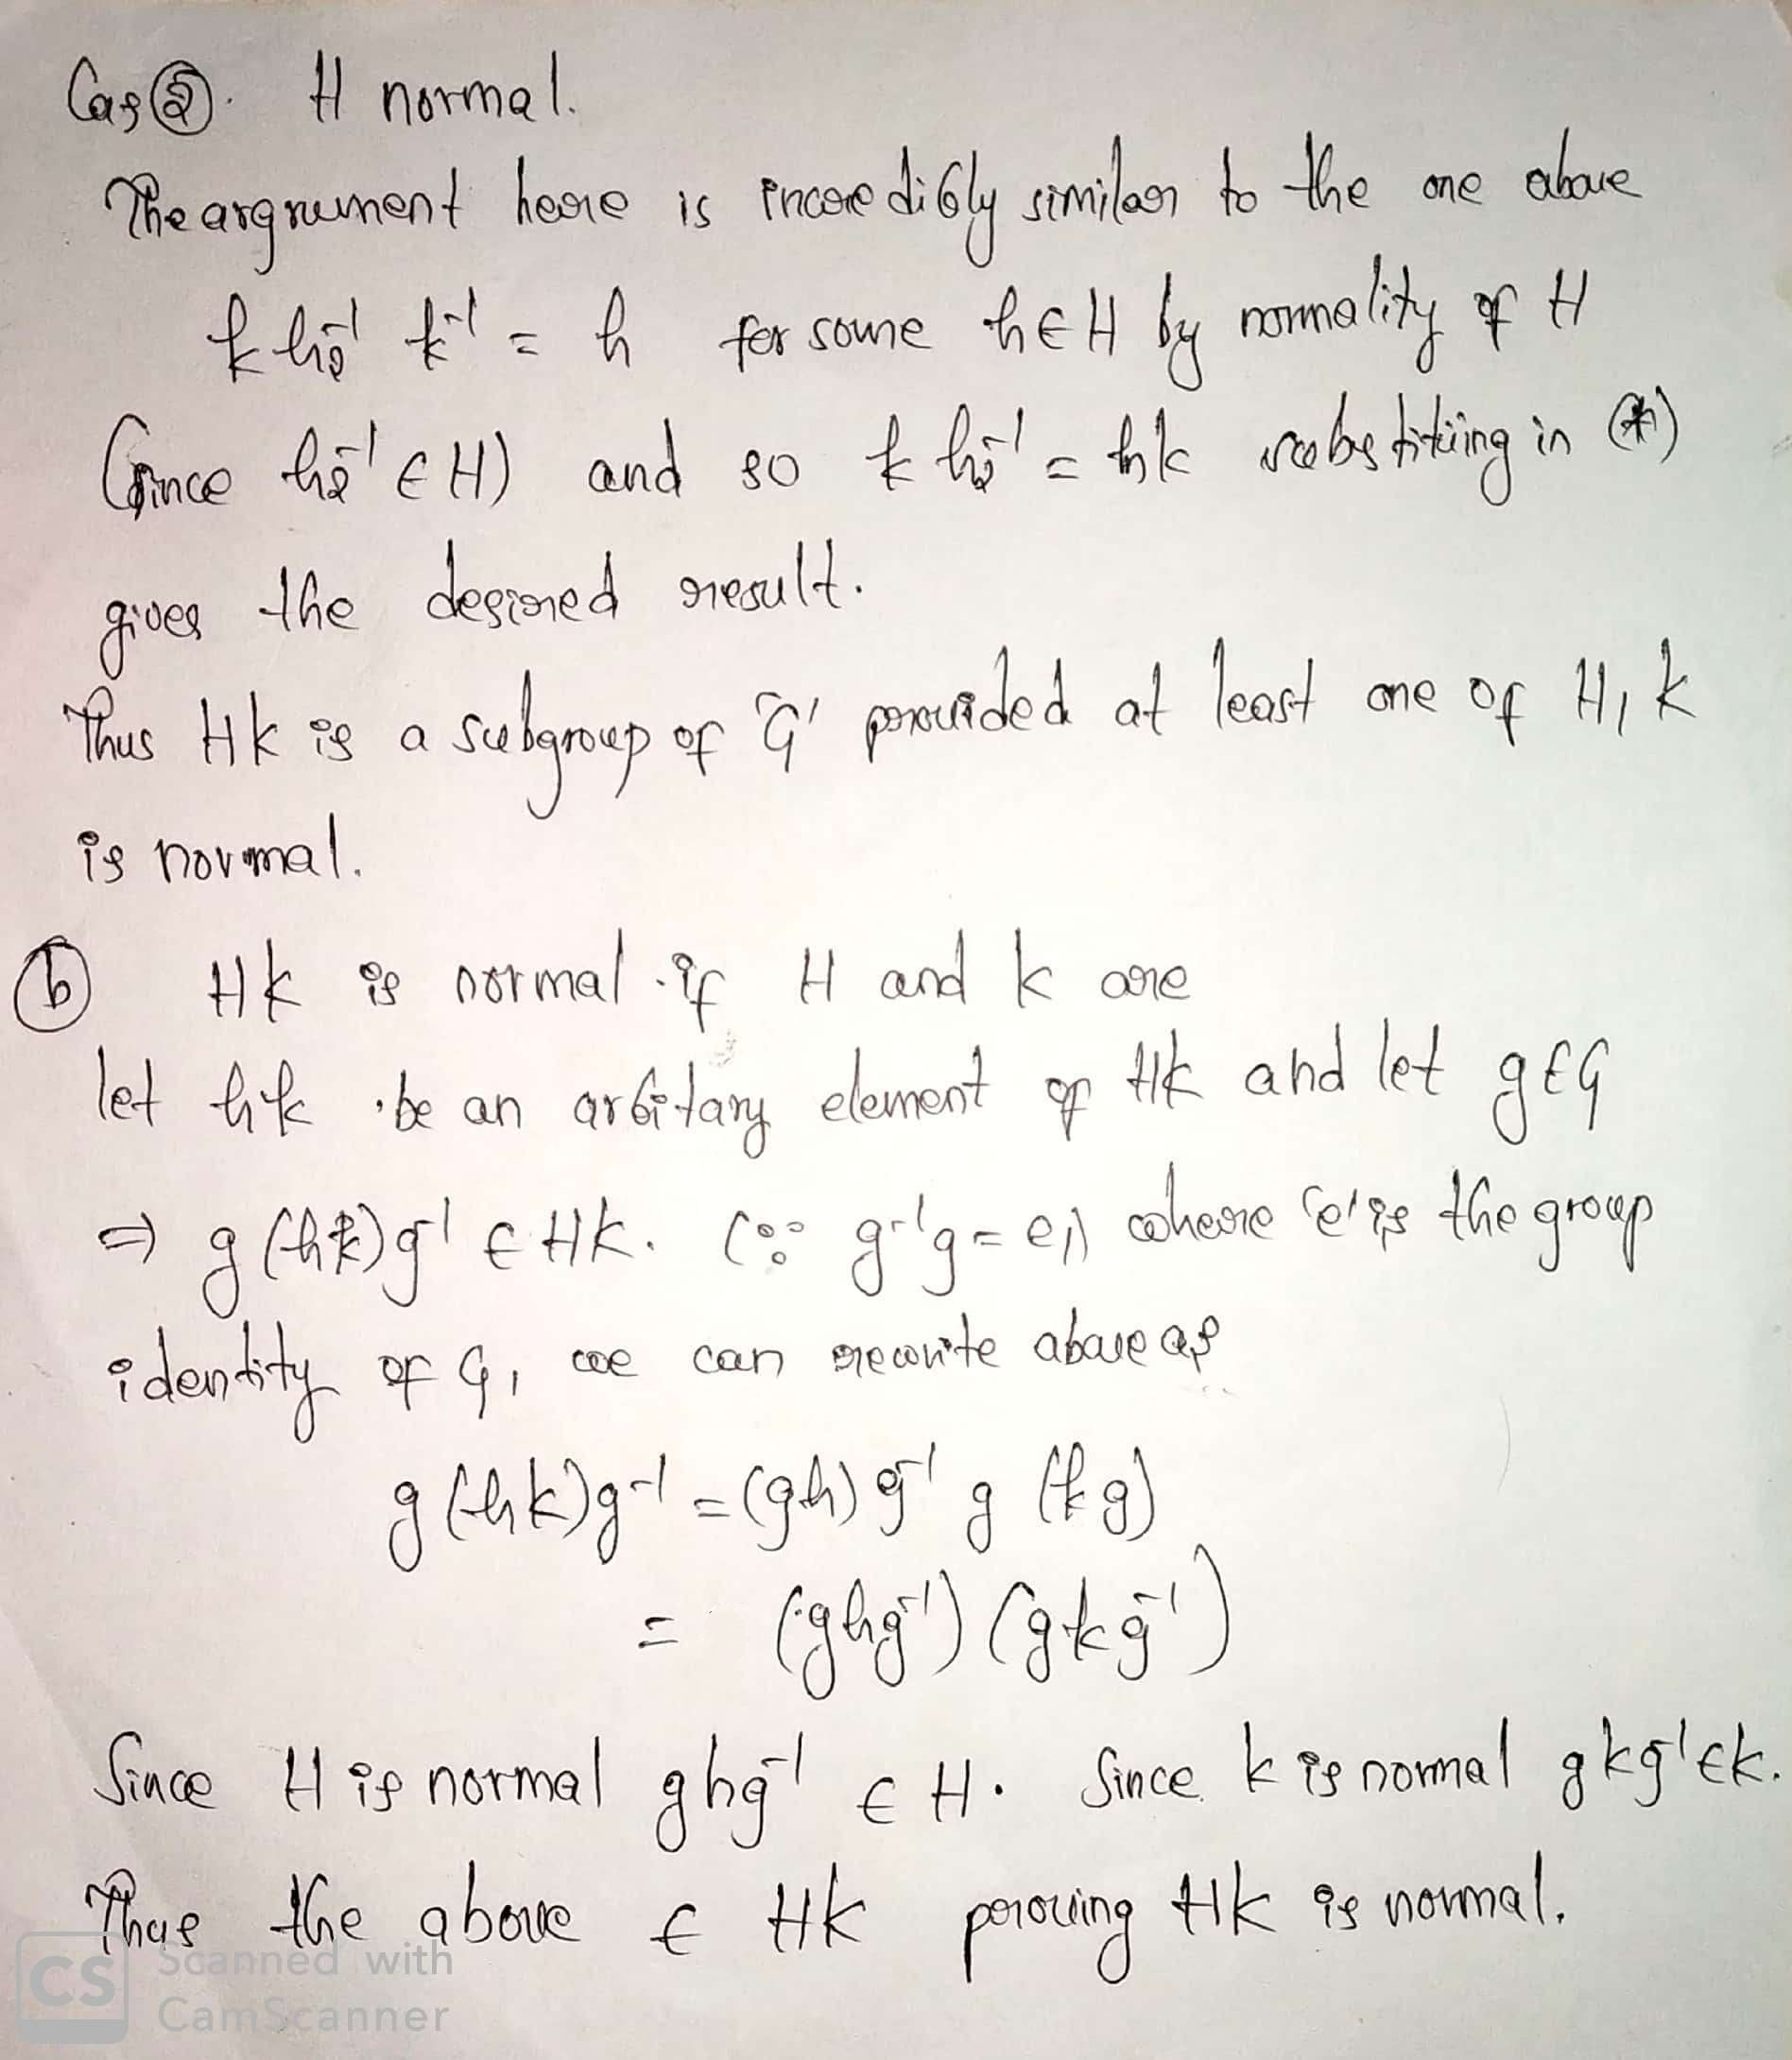 (4) (4 x 10 = 40 points) Suppose that H, K are distinct nontrivial proper subgroups of a group G such that r-'HICH and r-'KICK for all 1 E G. (a) Is the set HK a subgroup of G? If yes, prove that it is really a subgroup. If no, explain why. (b) Prove that V6JDh7